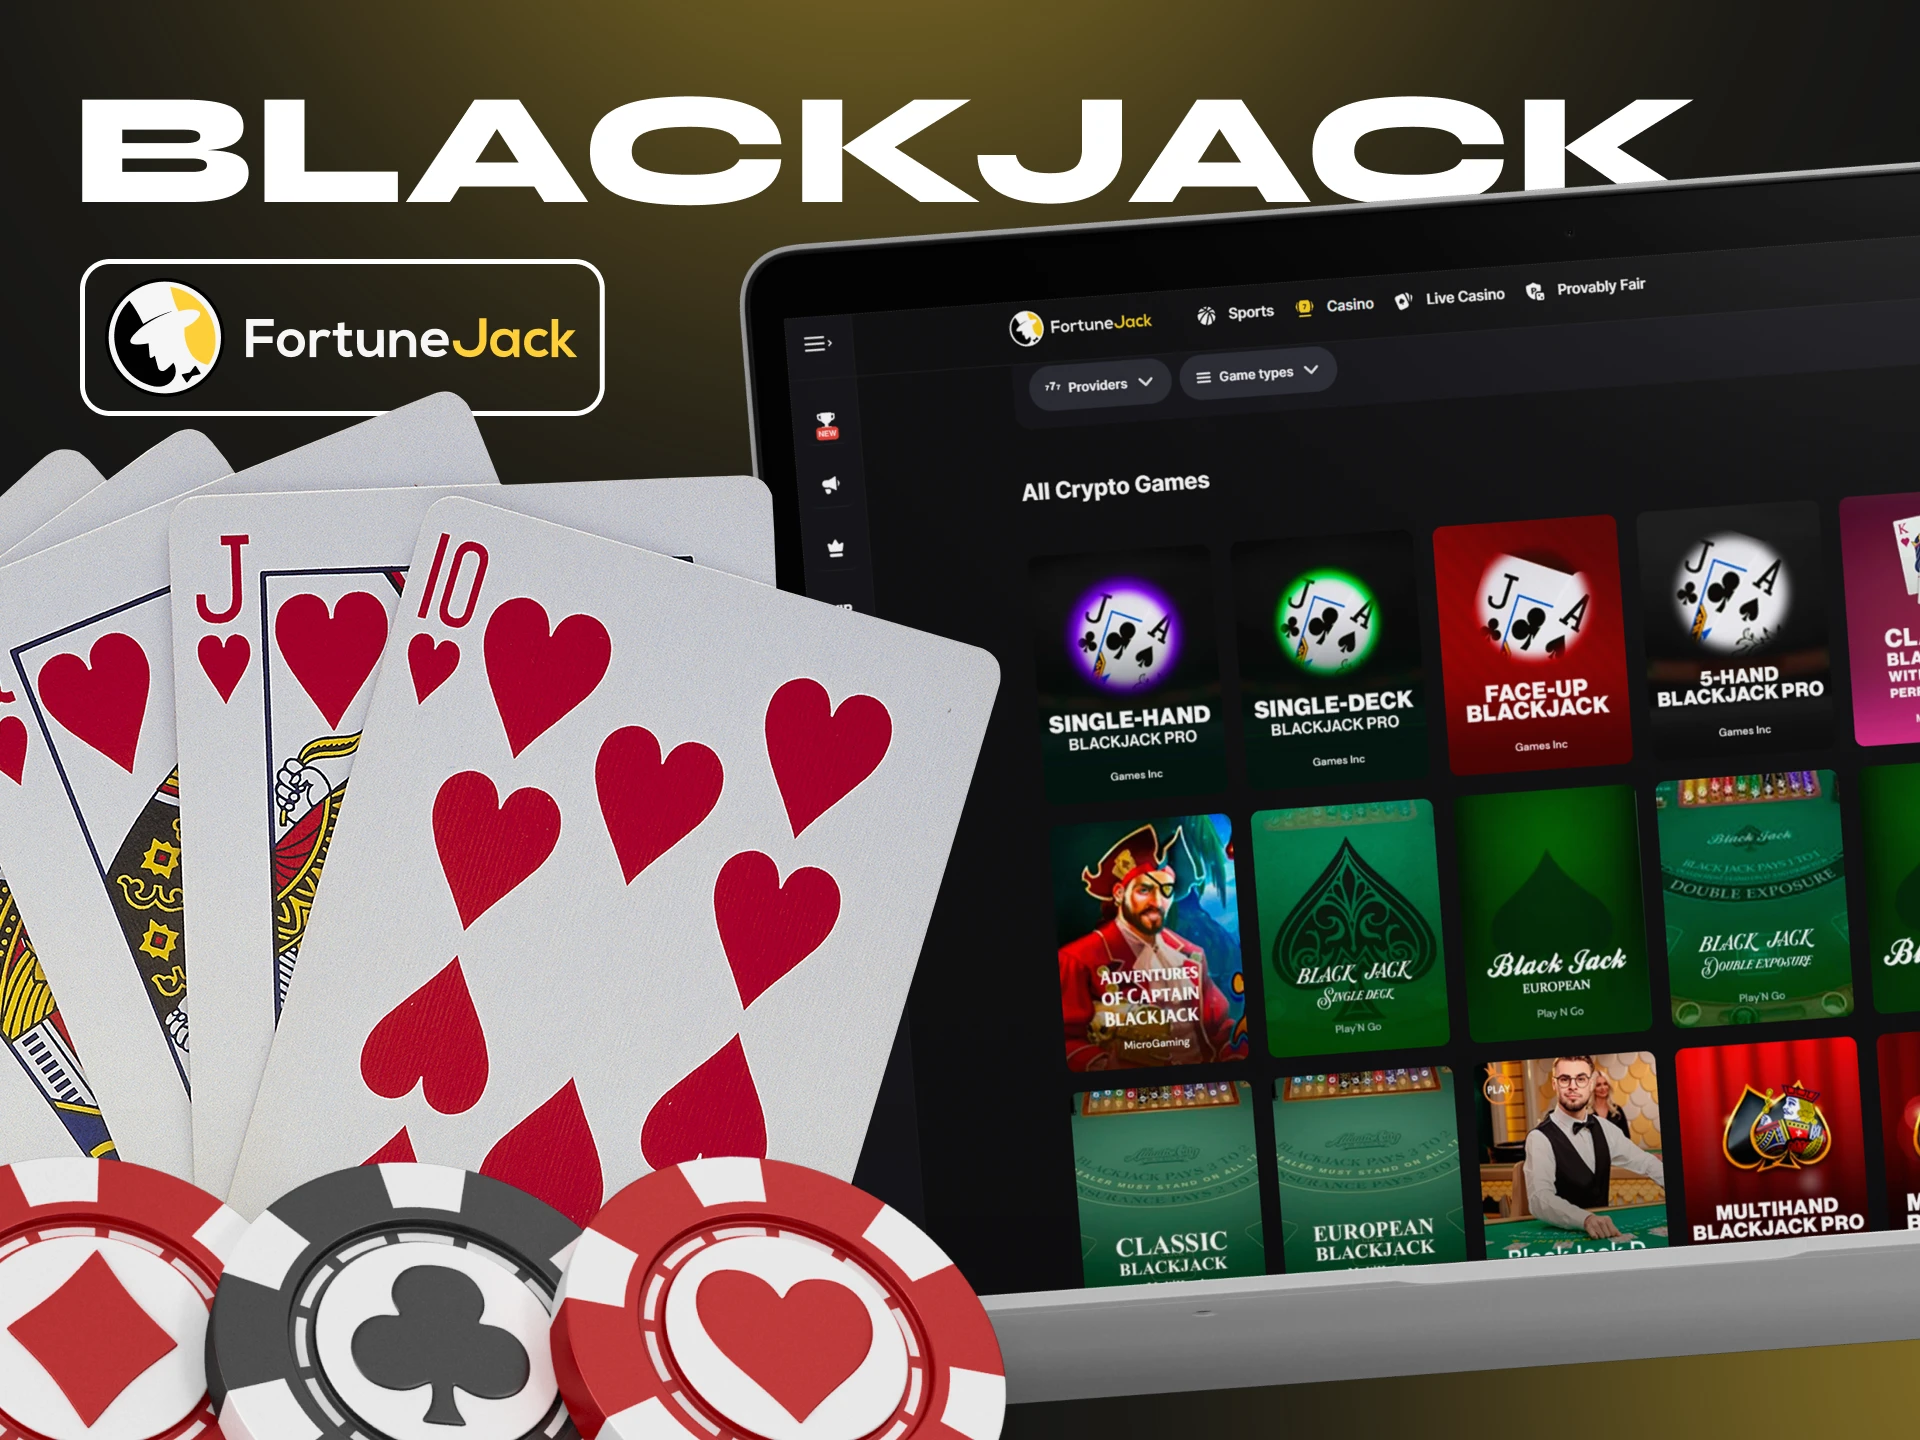 At FortuneJack Casino, choose your favorite blackjack game and start playing.